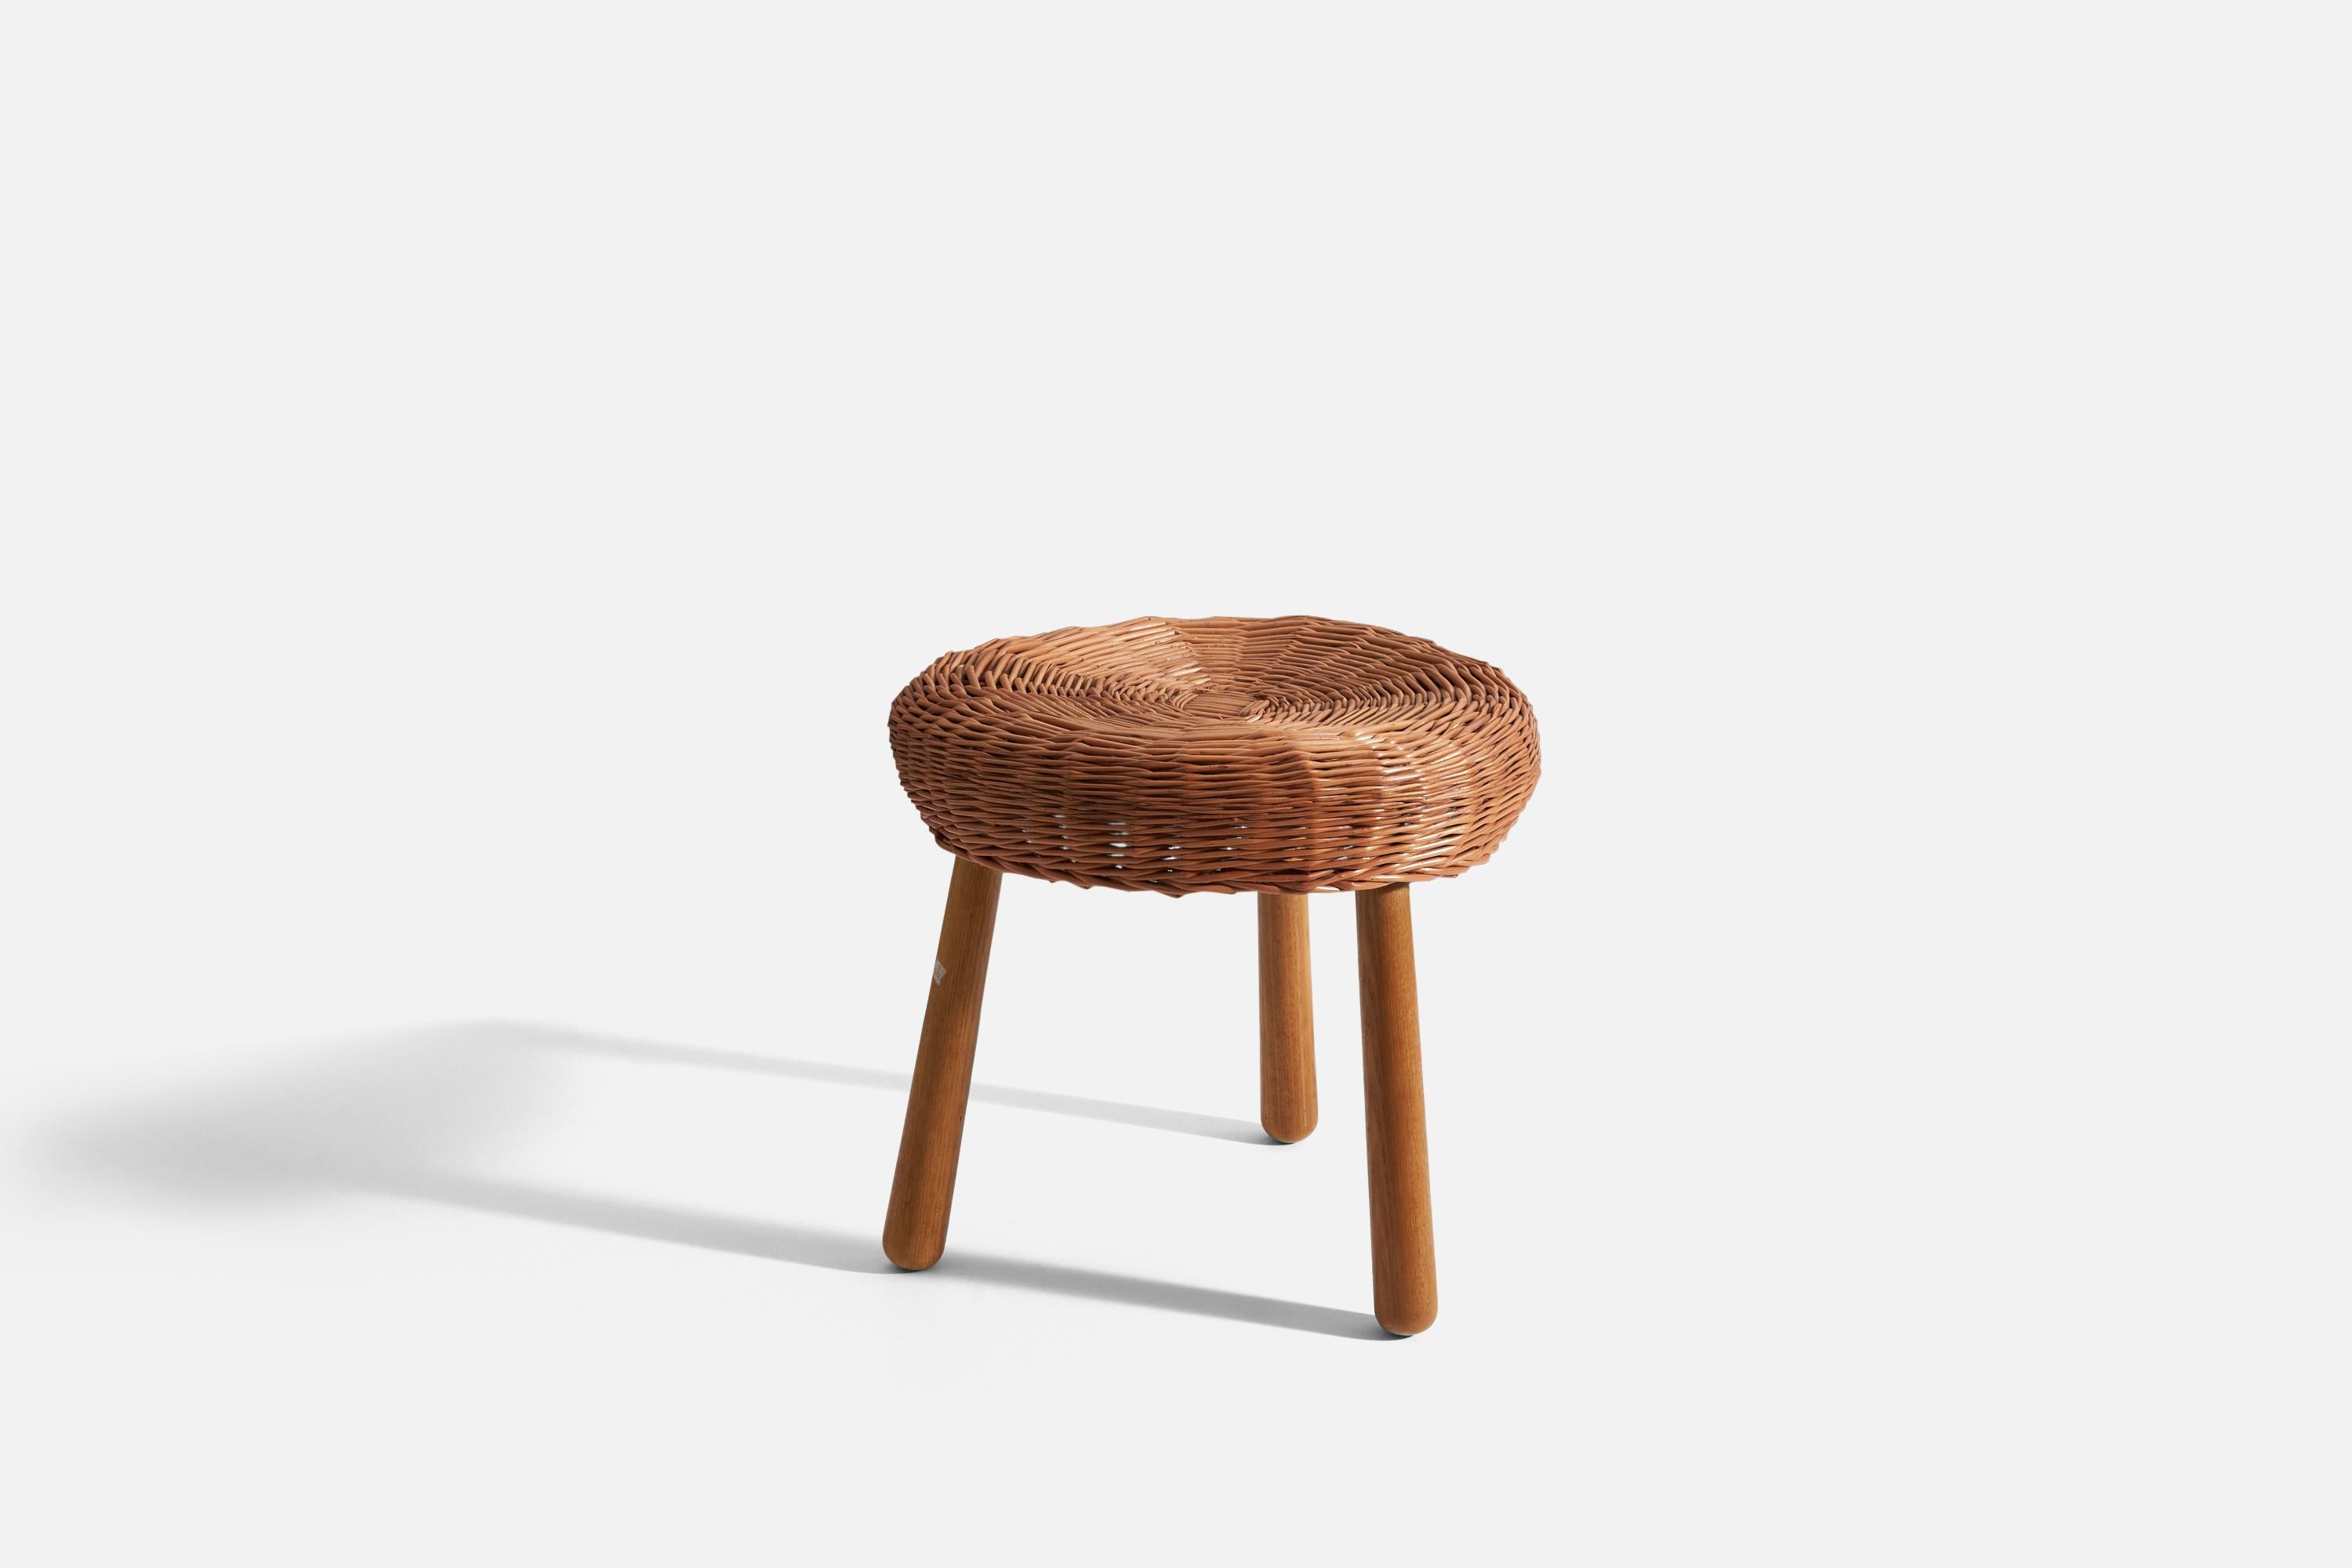 American Tony Paul, Stool, Wicker, Wood, United States, 1950s For Sale